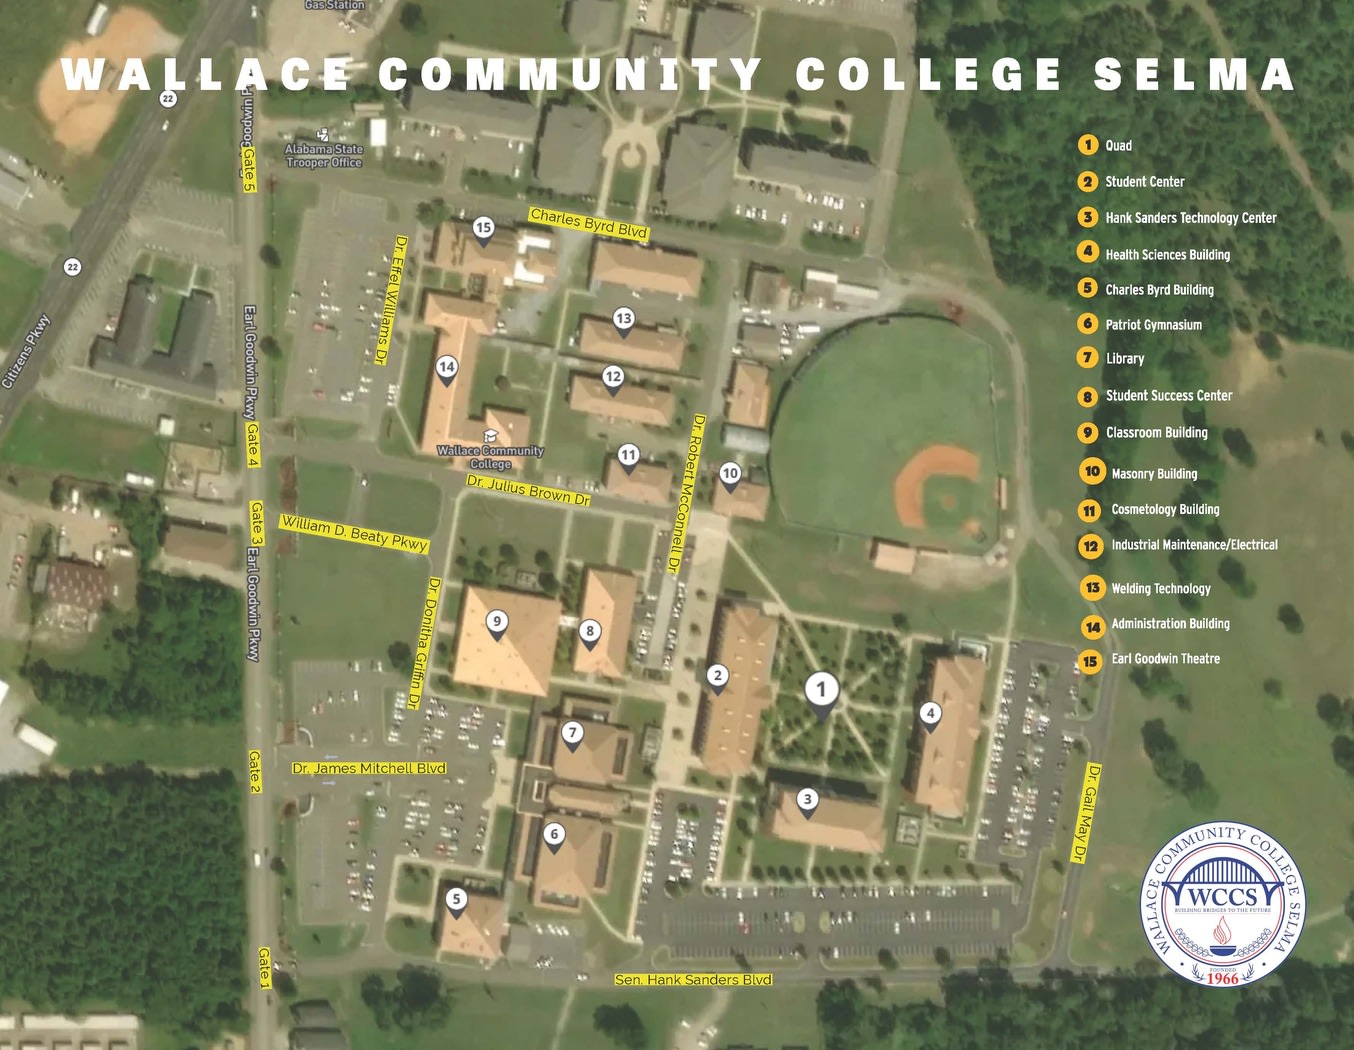 Campus Map | Wallace Community College Selma